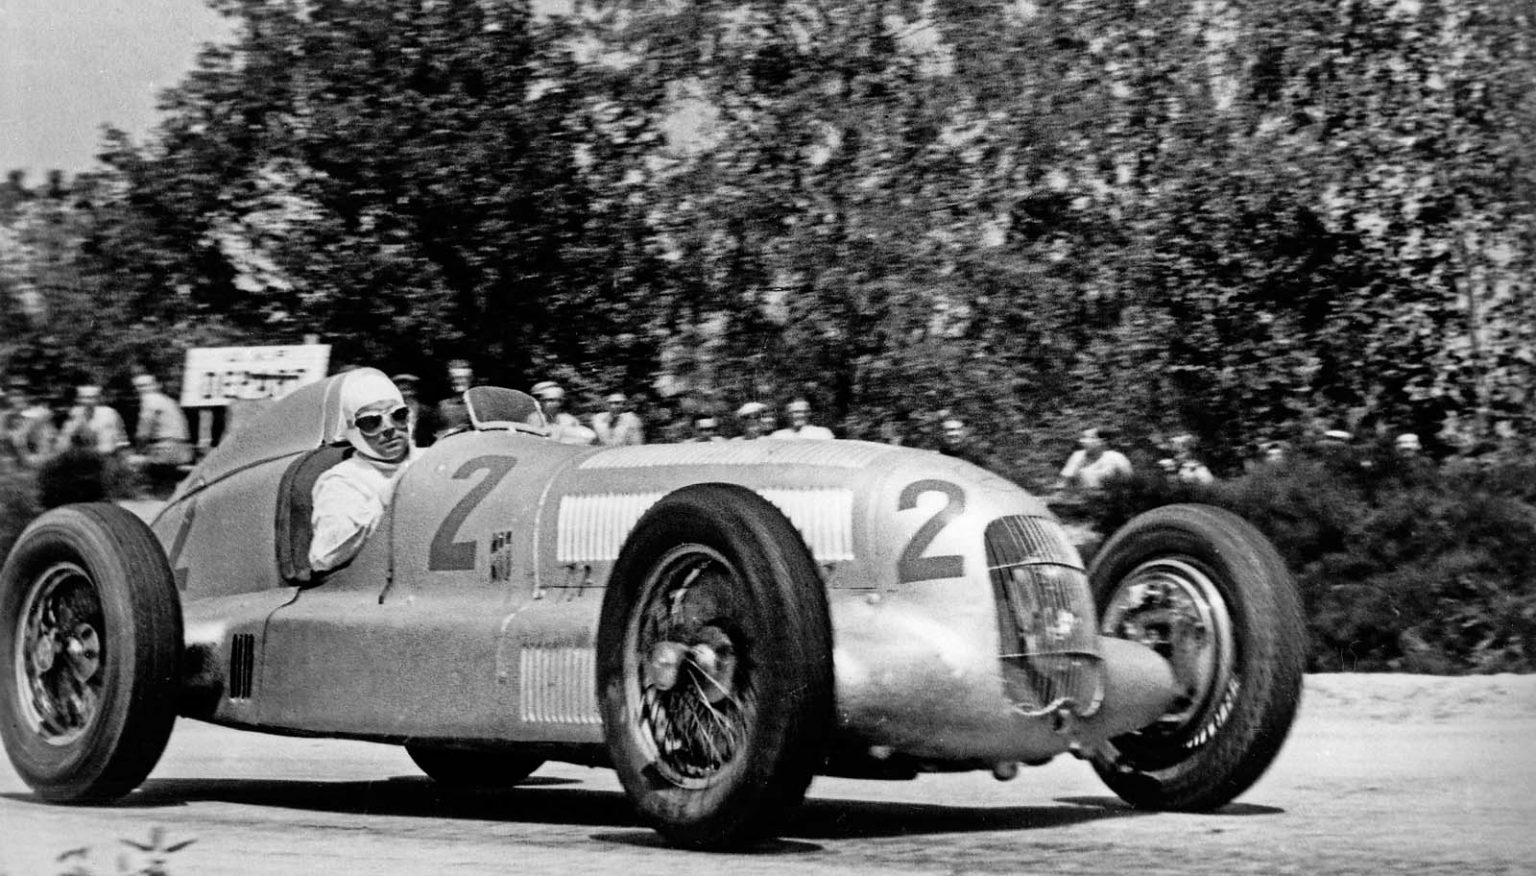 Rudolf Caracciola is crowned the 1935 European Grand Prix Champion at the wheel of the Mercedes-Benz W 25 formula racing car, weighing a mere 750 kilograms. He claimed the victory at races including the French Grand Prix in Montlhéry, on 23 June 1935, ahead of his team mate Manfred von Brauchitsch. (Photo signature in the Mercedes-Benz Classic archive: 22021)